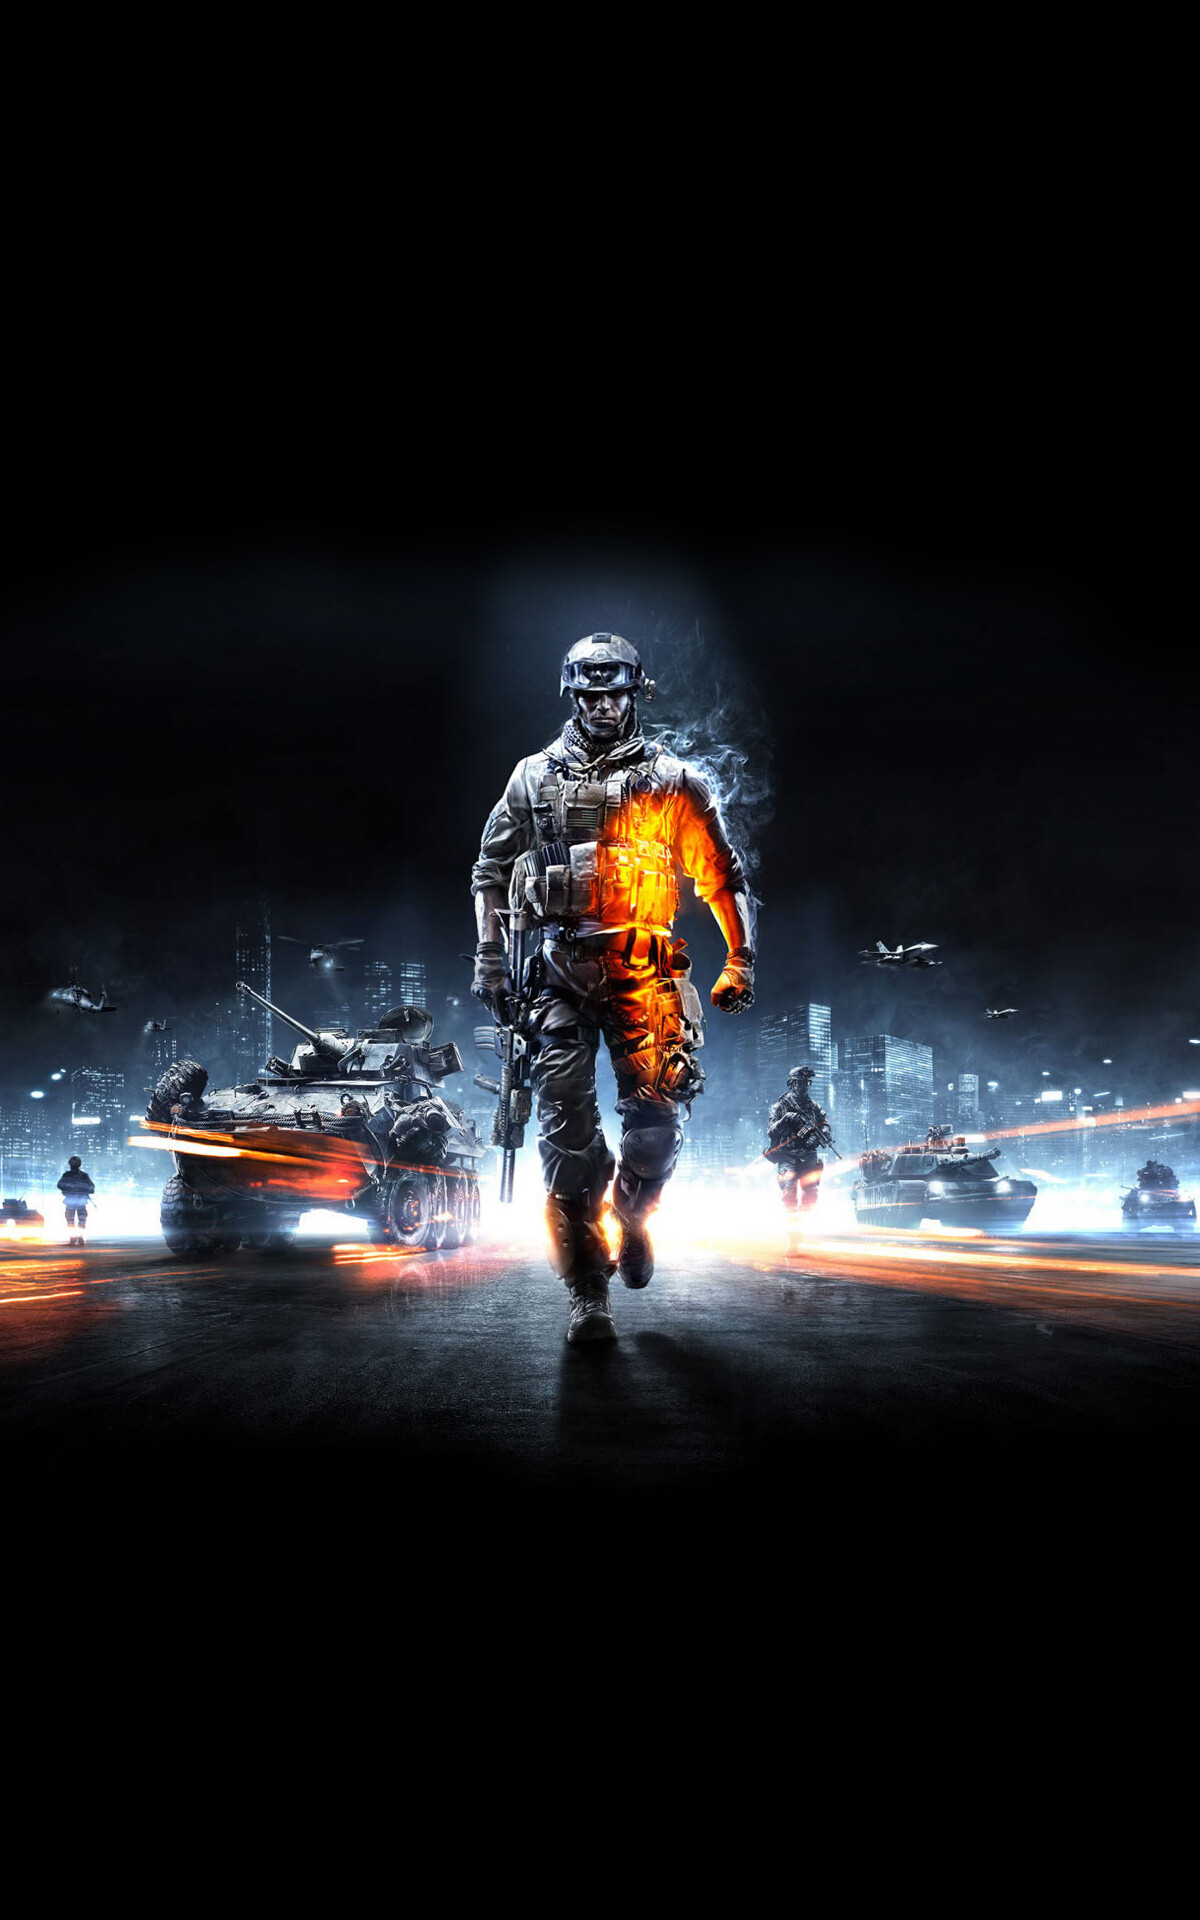 Battlefield 3: BF3, Debuts the new Frostbite 2 engine, The next installment of DICE's cutting-edge game engine. 1200x1920 HD Wallpaper.